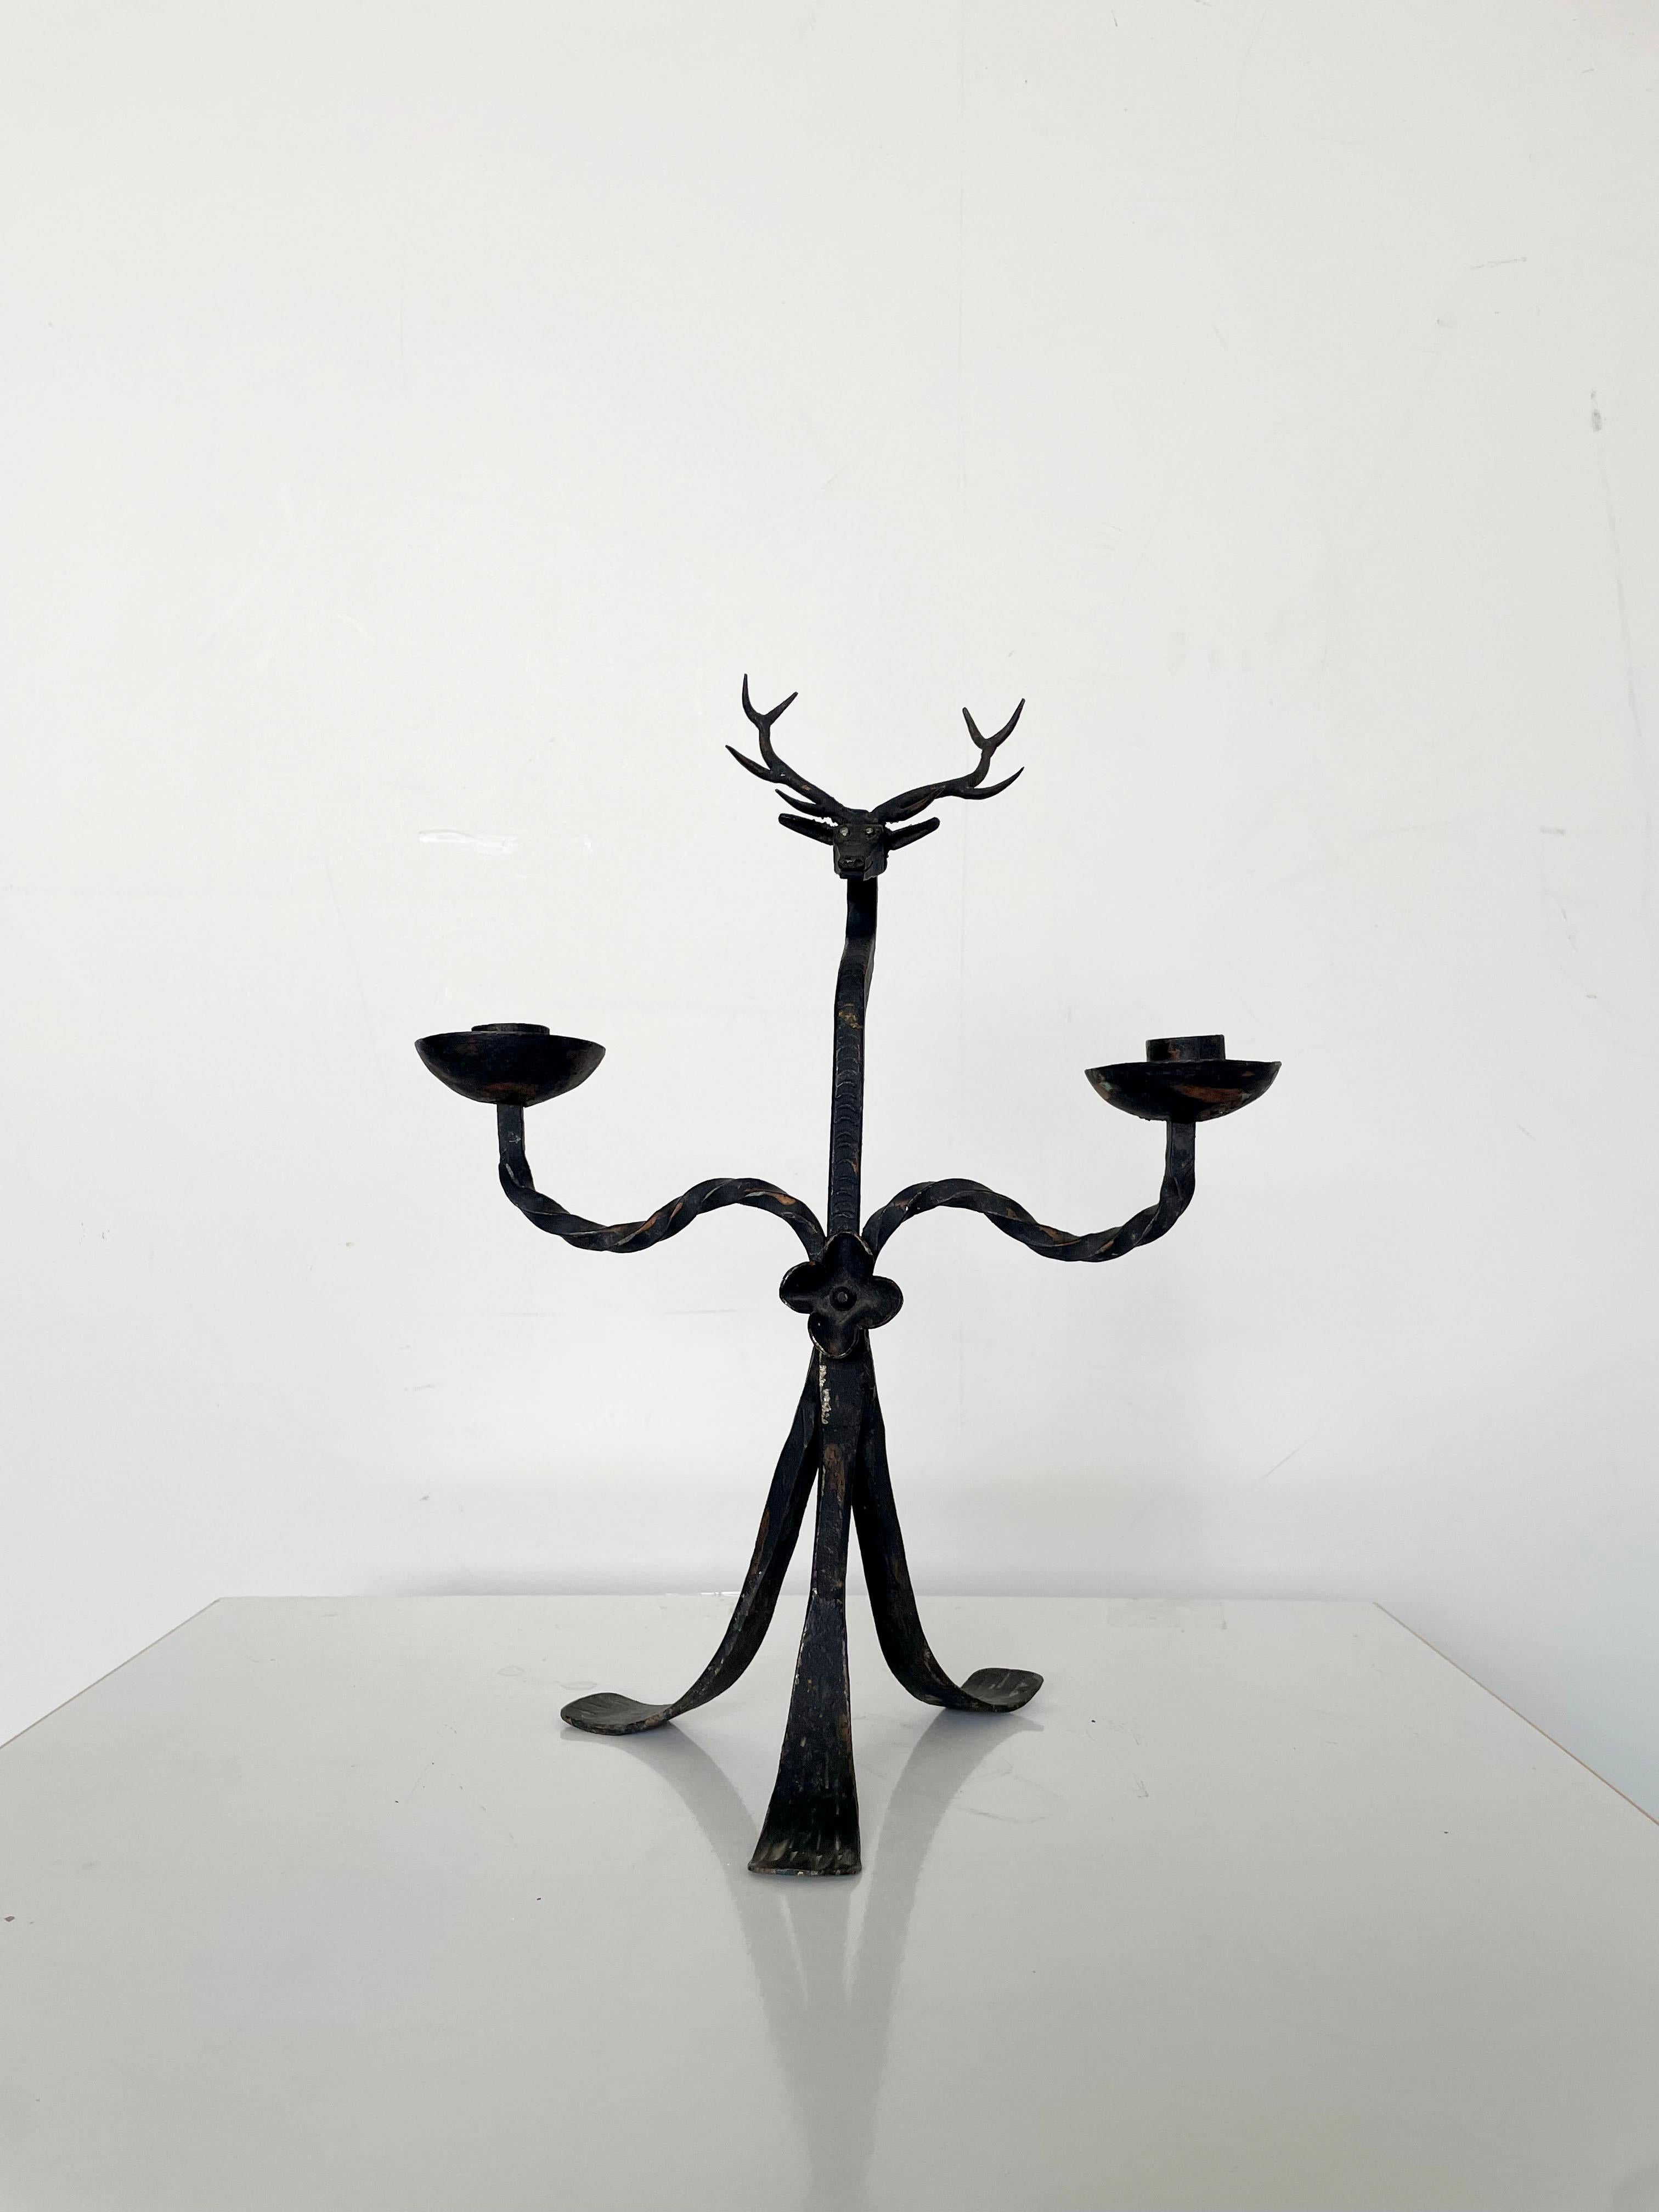 Vintage wrought Iron Deer Candlestick Candelabra designed in Brutalist style

Handcrafted in 1940s / 1950s

Dimensions: 36 x 28 x 18 cm (H x W x D); Suitable for 2 cm diameter candles

The item is in original condition and has some age and use